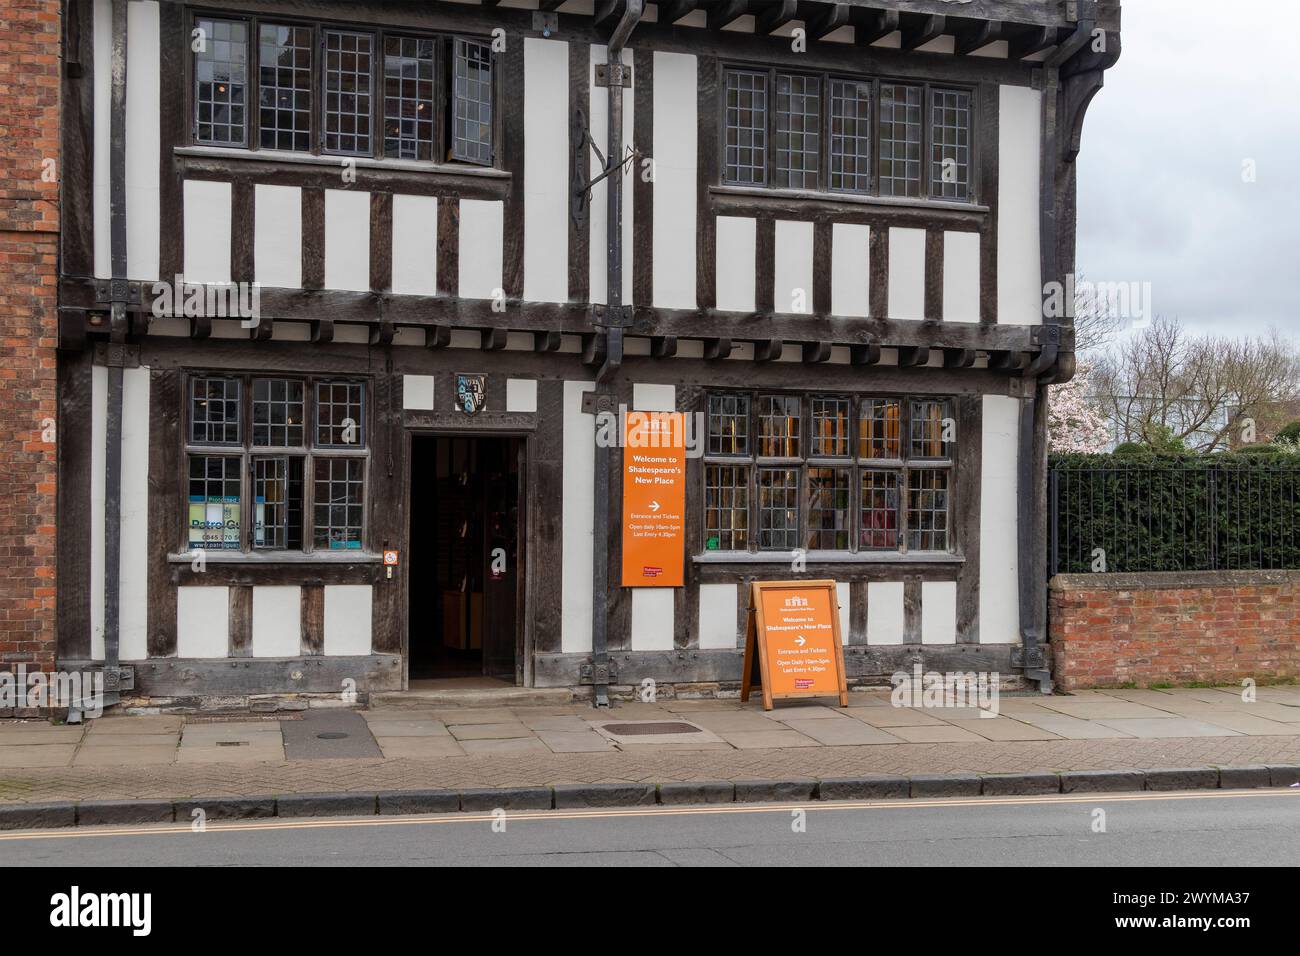 William Shakespeare's New place, Stratford upon Avon, Angleterre, Grande-Bretagne Banque D'Images